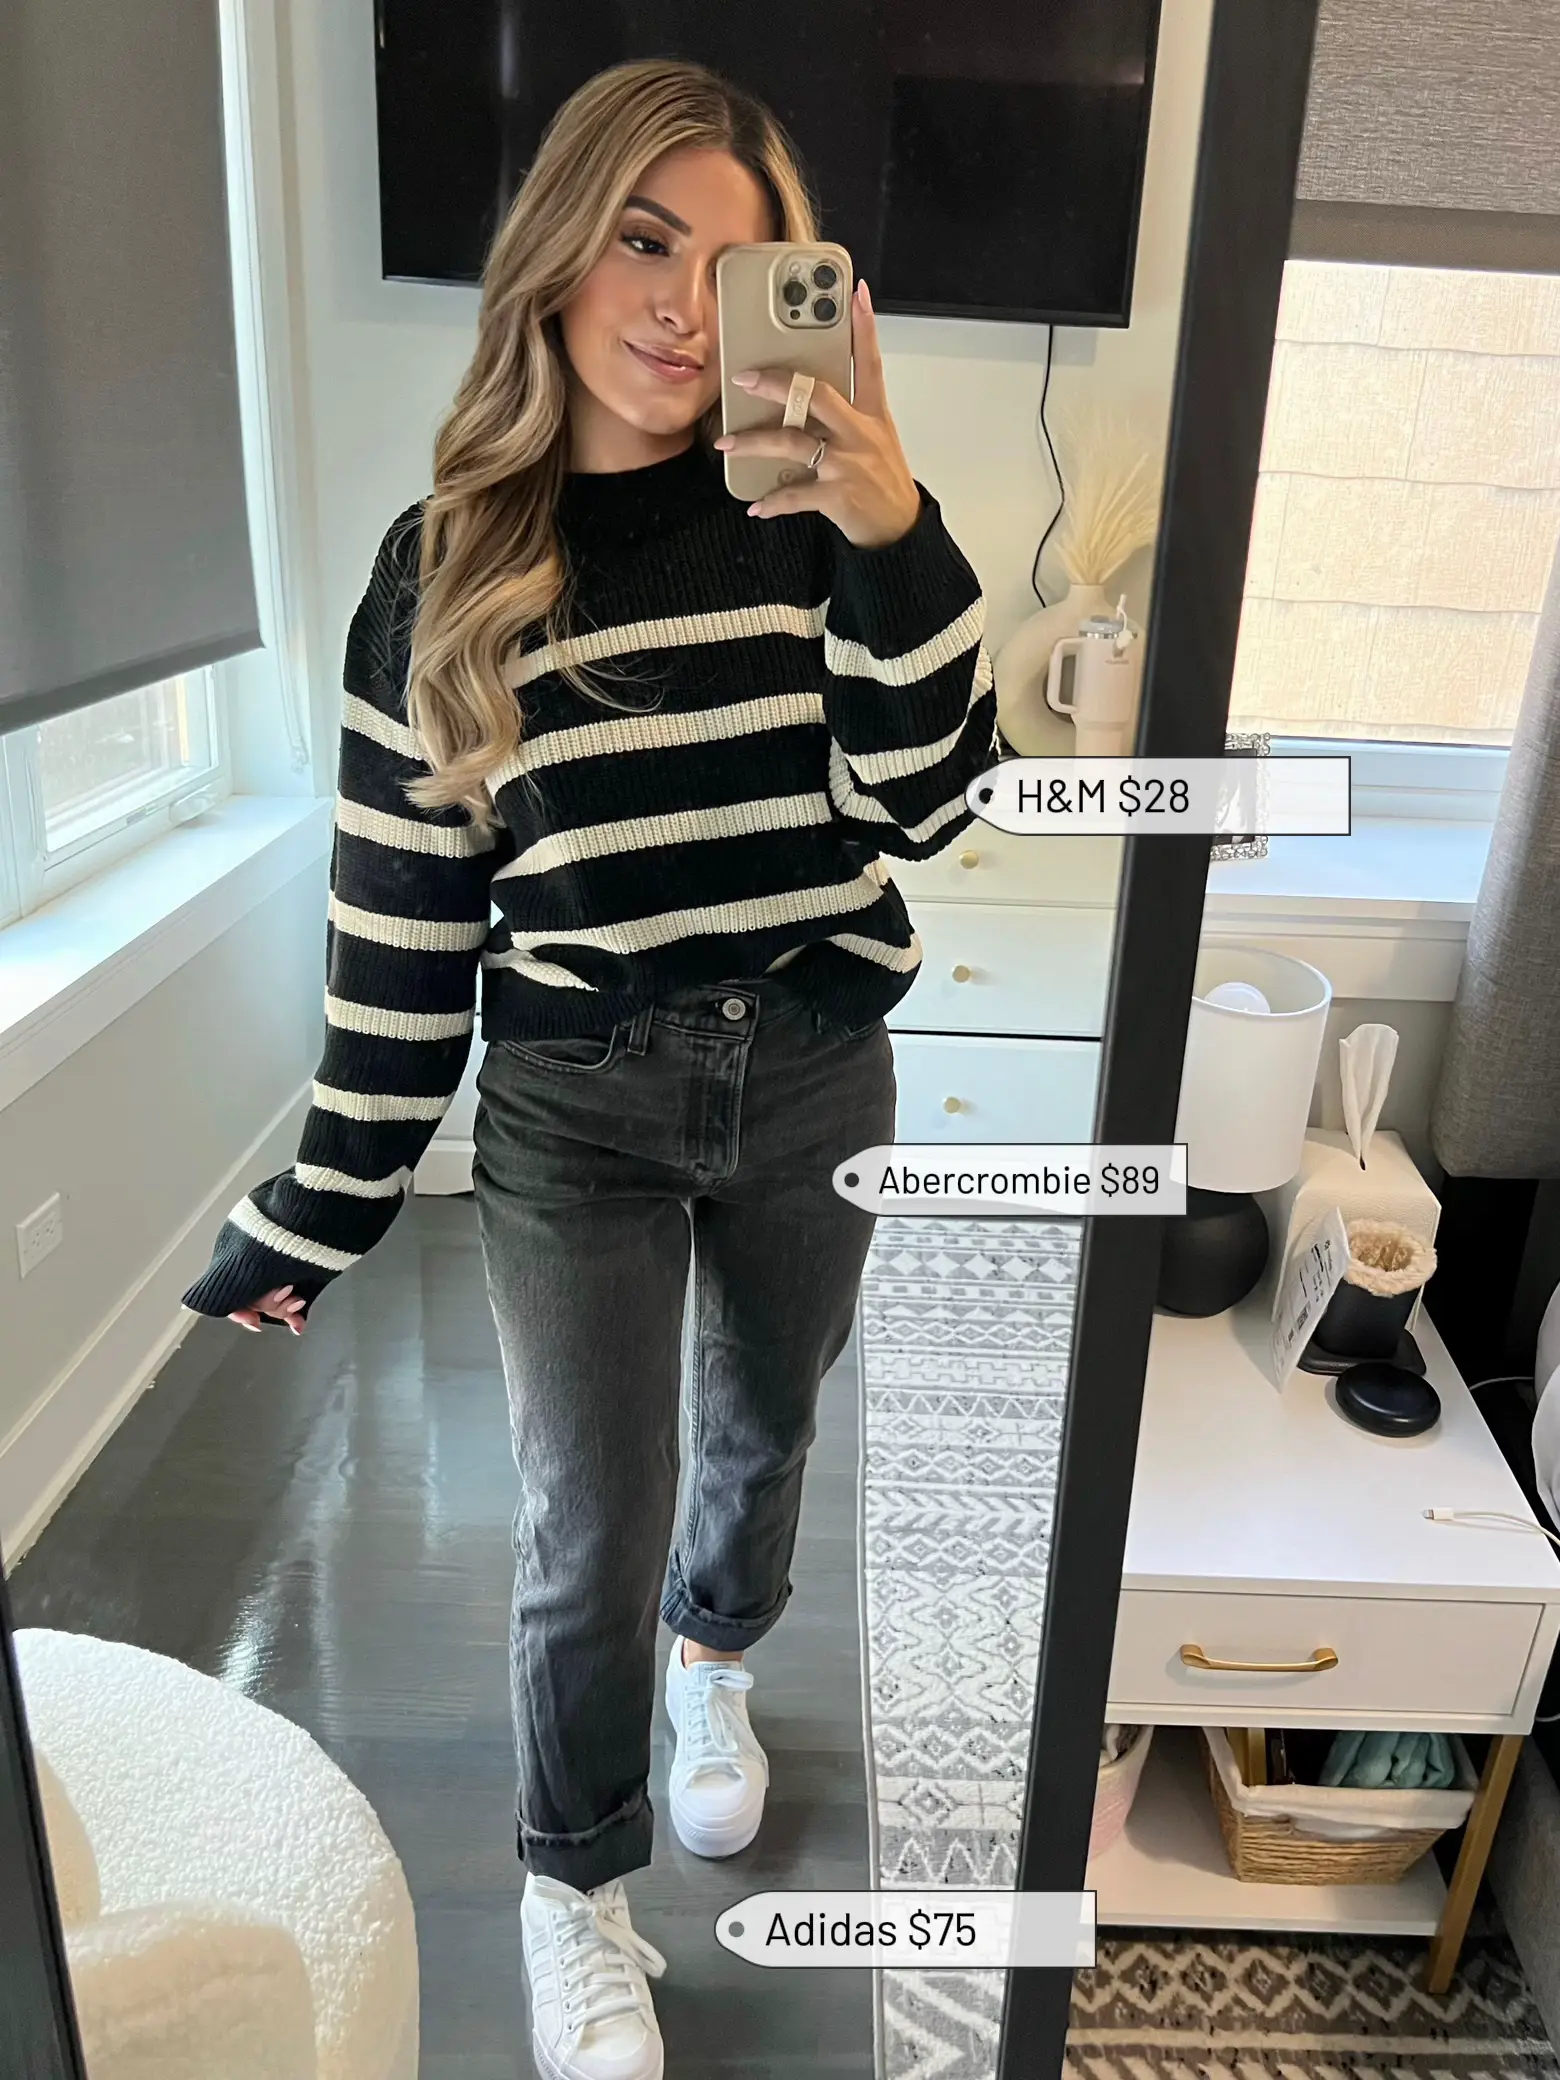 Date Night Outfits: Coordinating Looks – Glik's